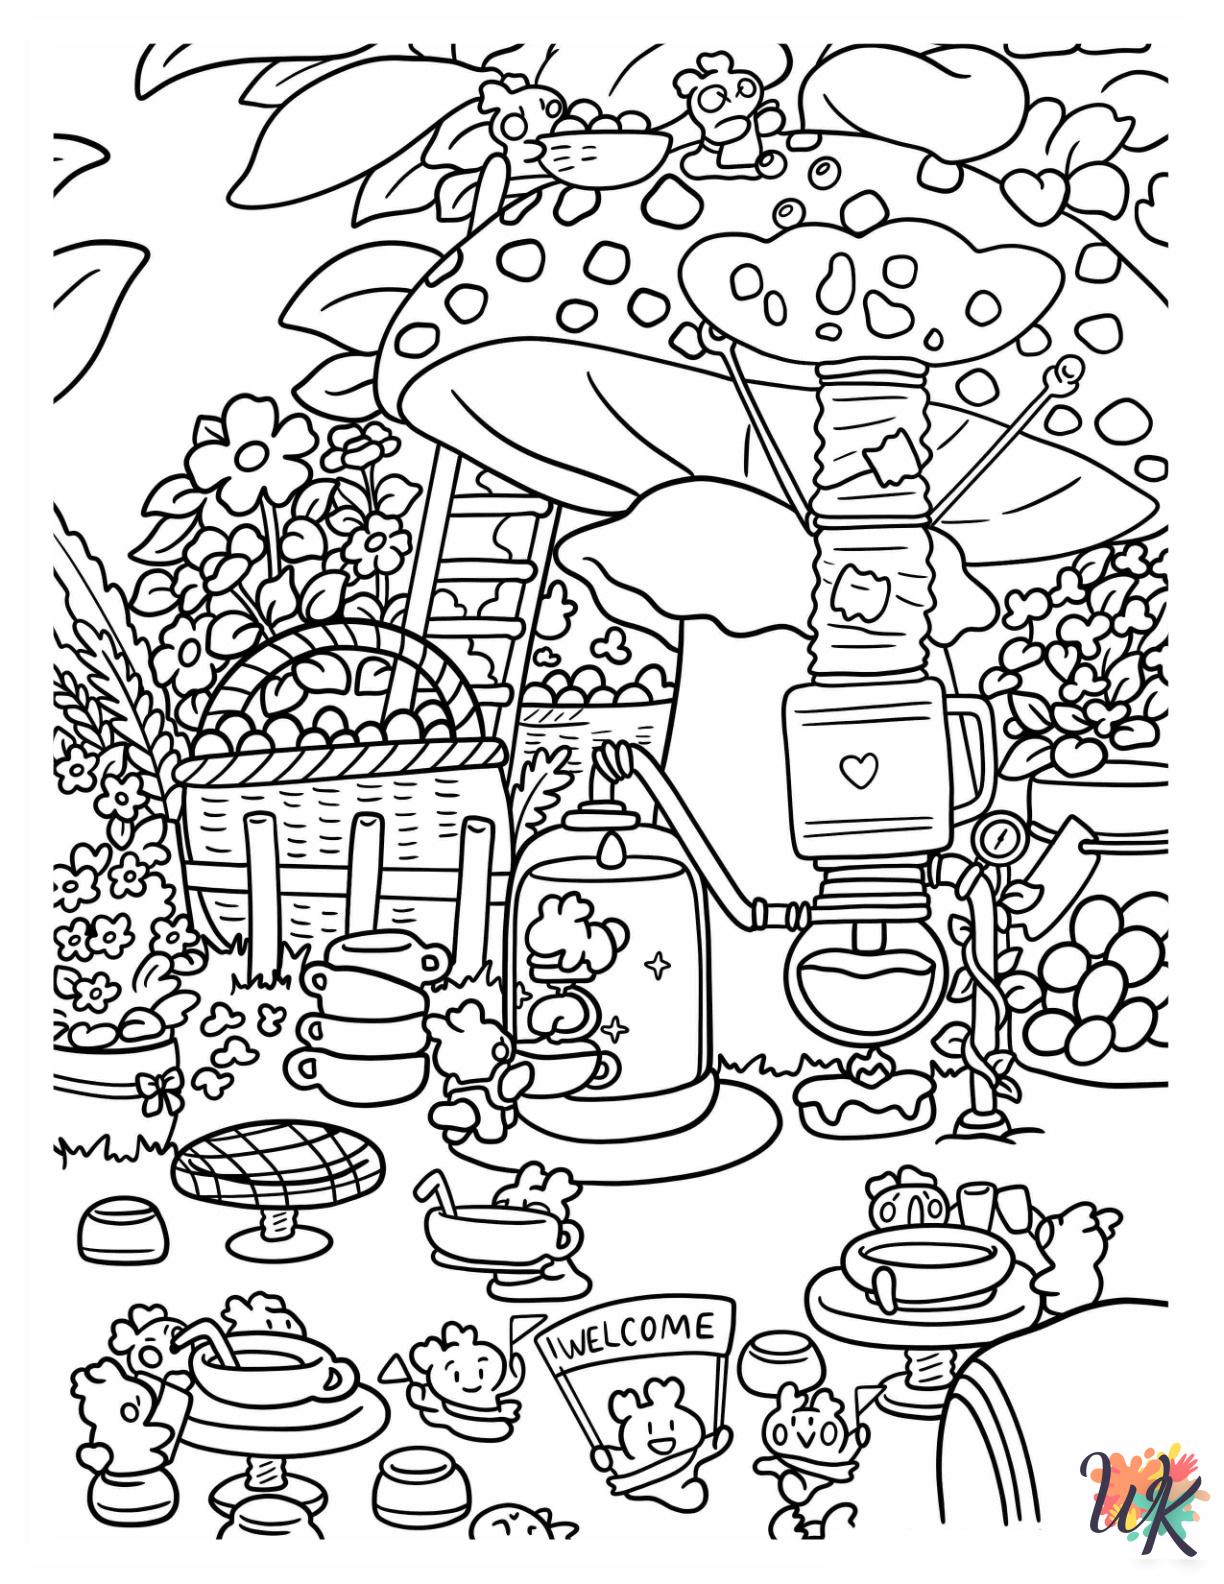 Aesthetic free coloring pages